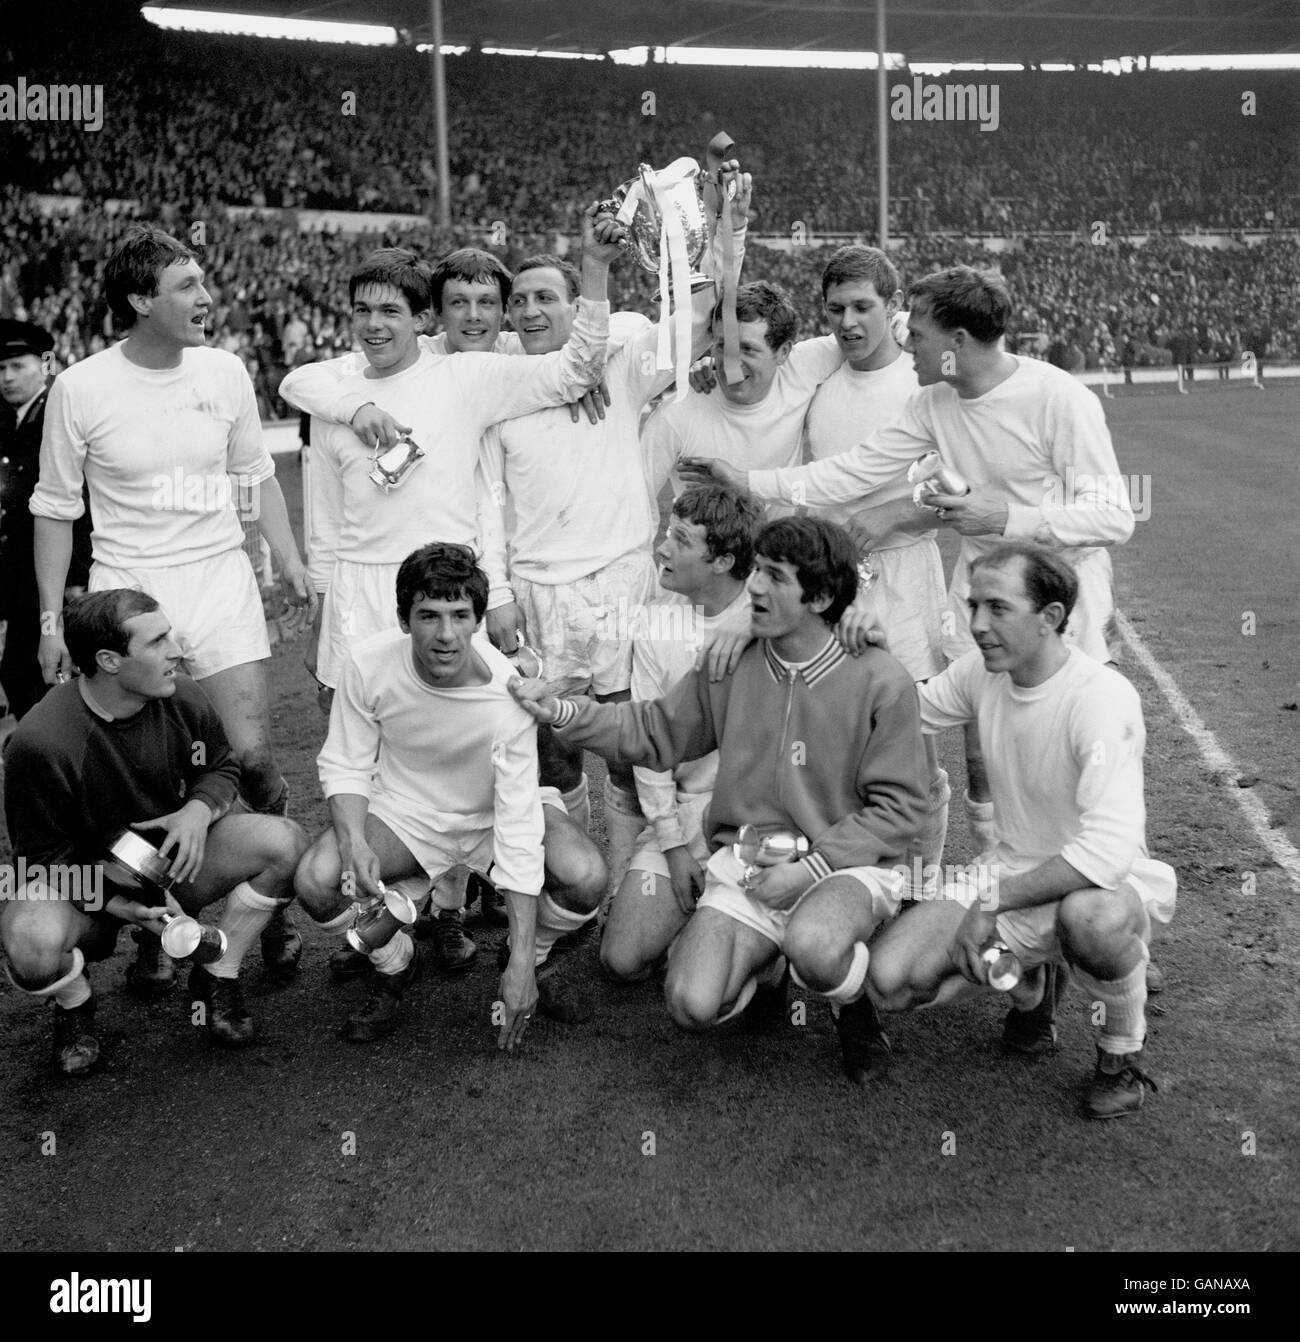 The victorious Queens Park Rangers team celebrate with the Football League Cup after their 3-2 win: (back row, l-r) Mike Keen, Tony Hazell, Ron Hunt, Mark Lazarus, Les Allen, Frank Sibley, Jim Langley; (front row, l-r) Ron Springett, Roger Morgan, Rodney Marsh, sub, Keith Sanderson Stock Photo